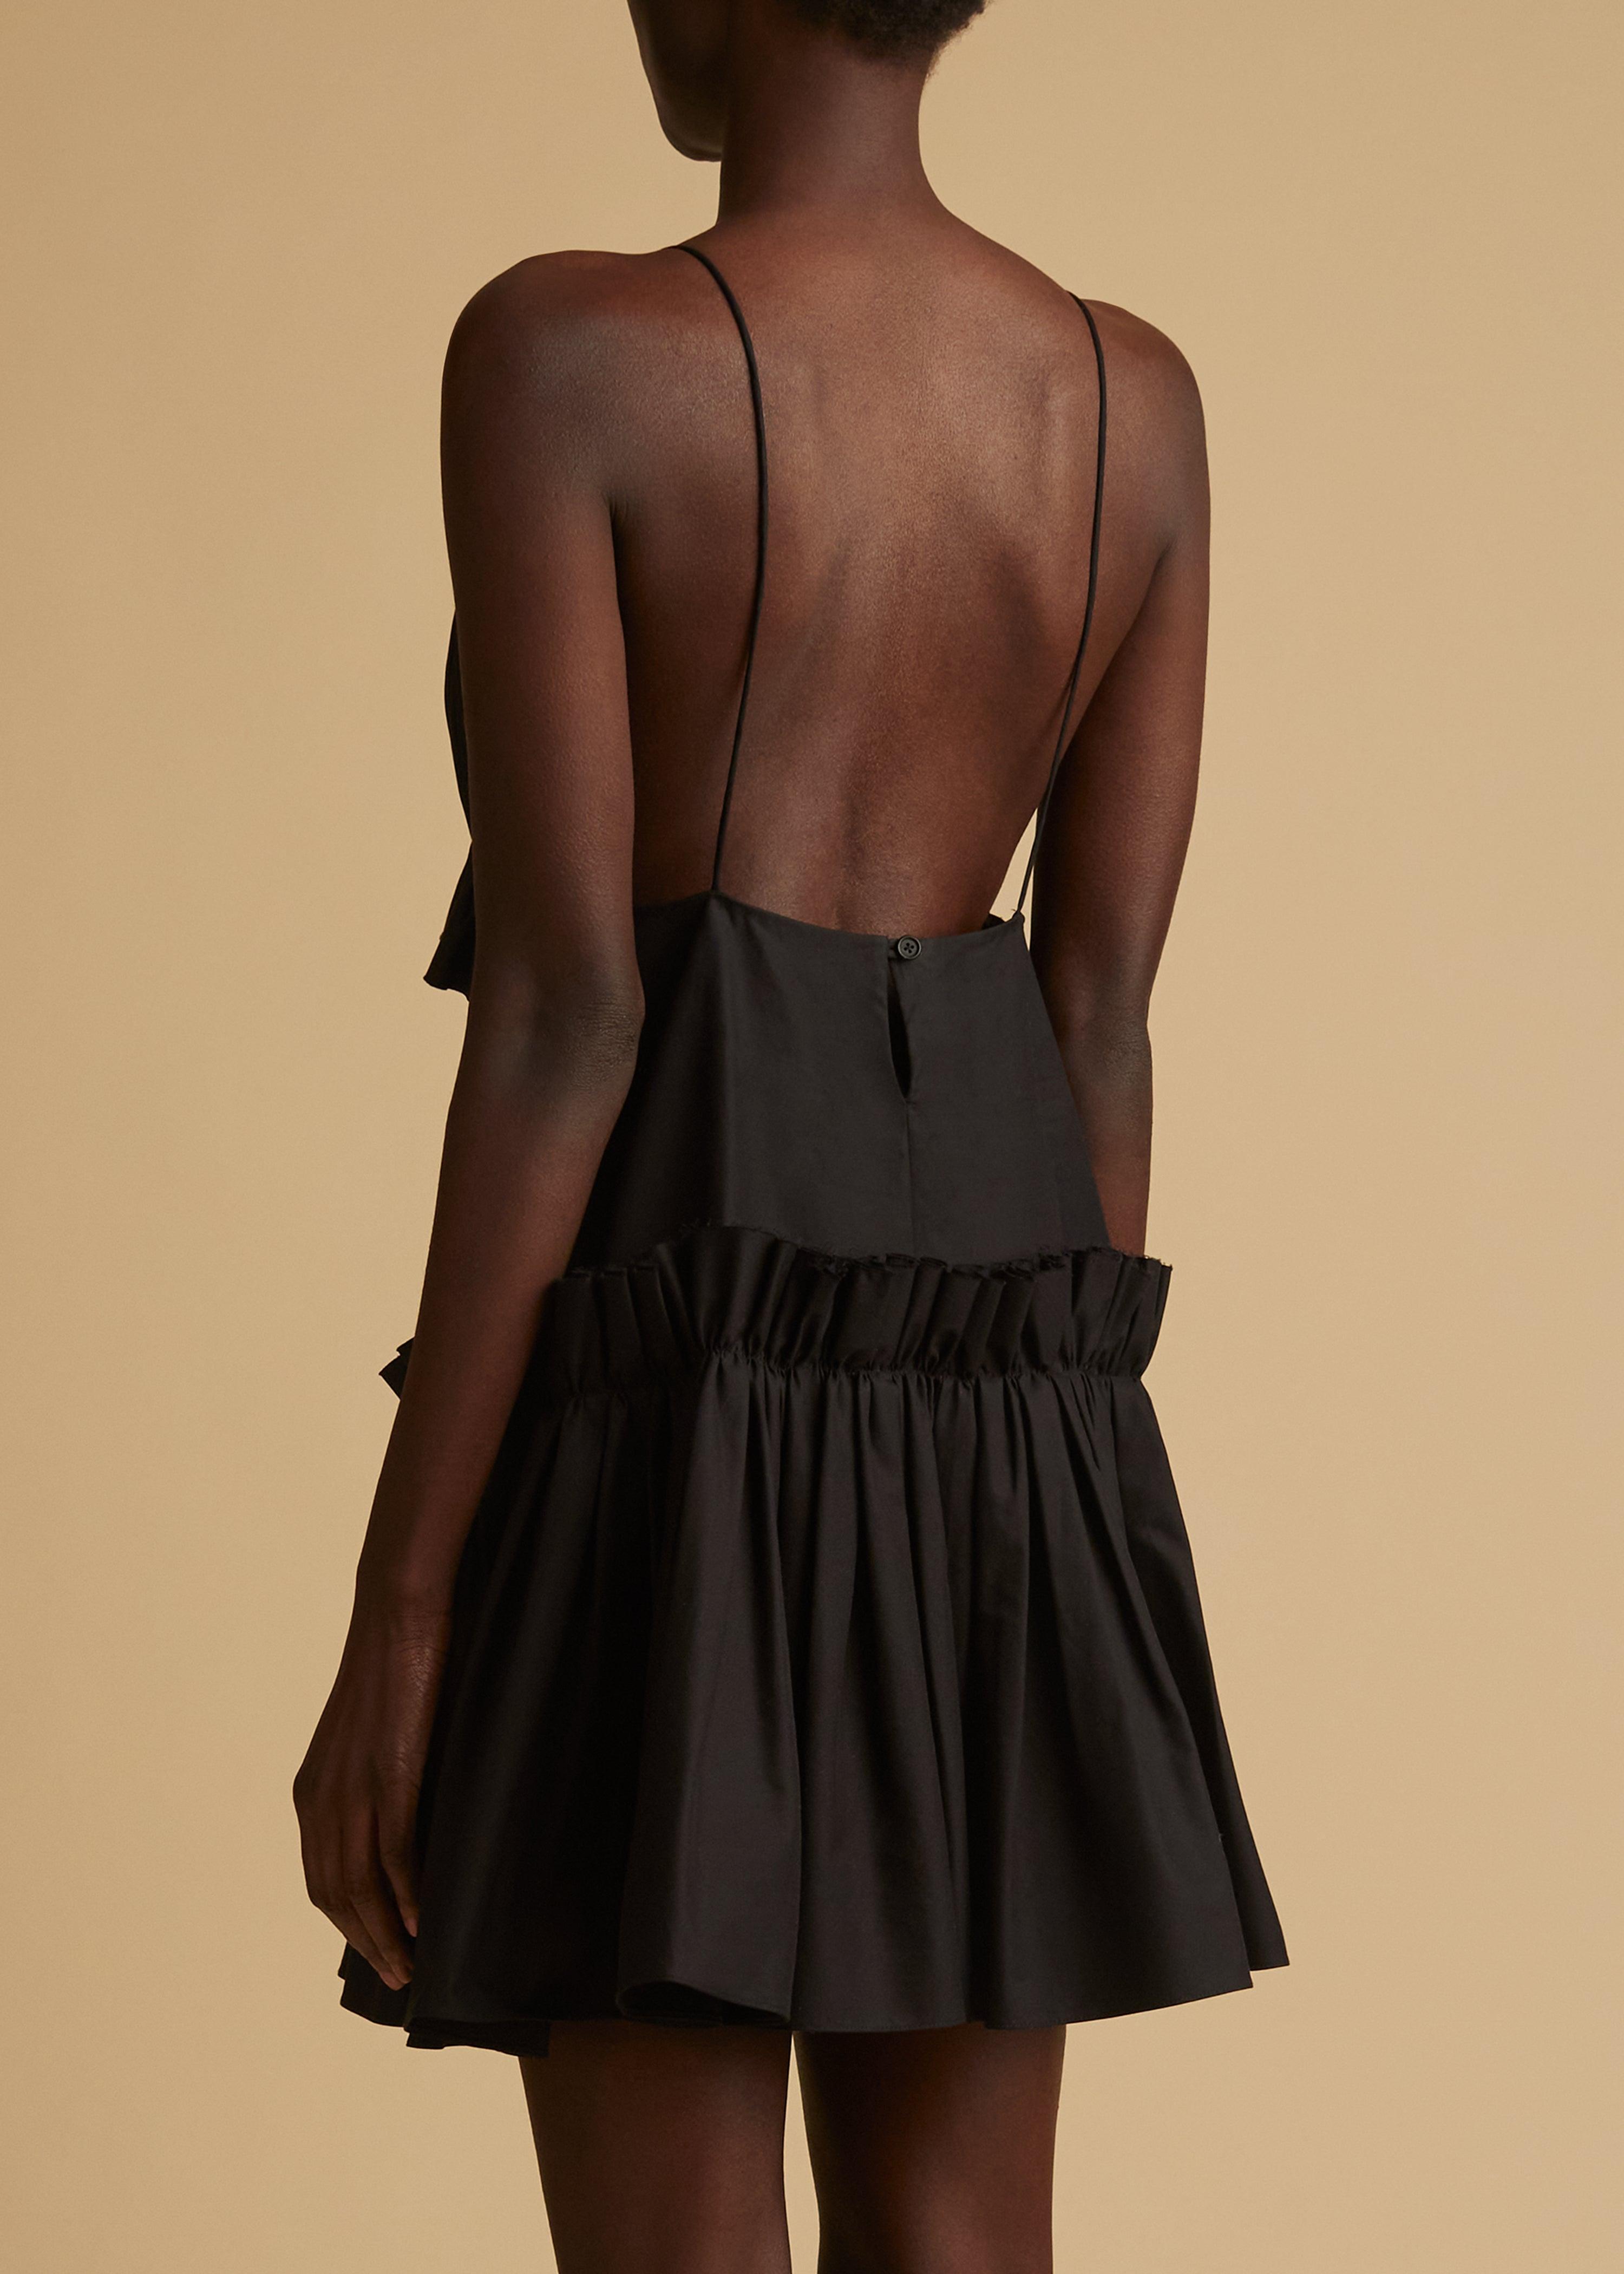 The Ade Dress in Black - The Iconic Issue